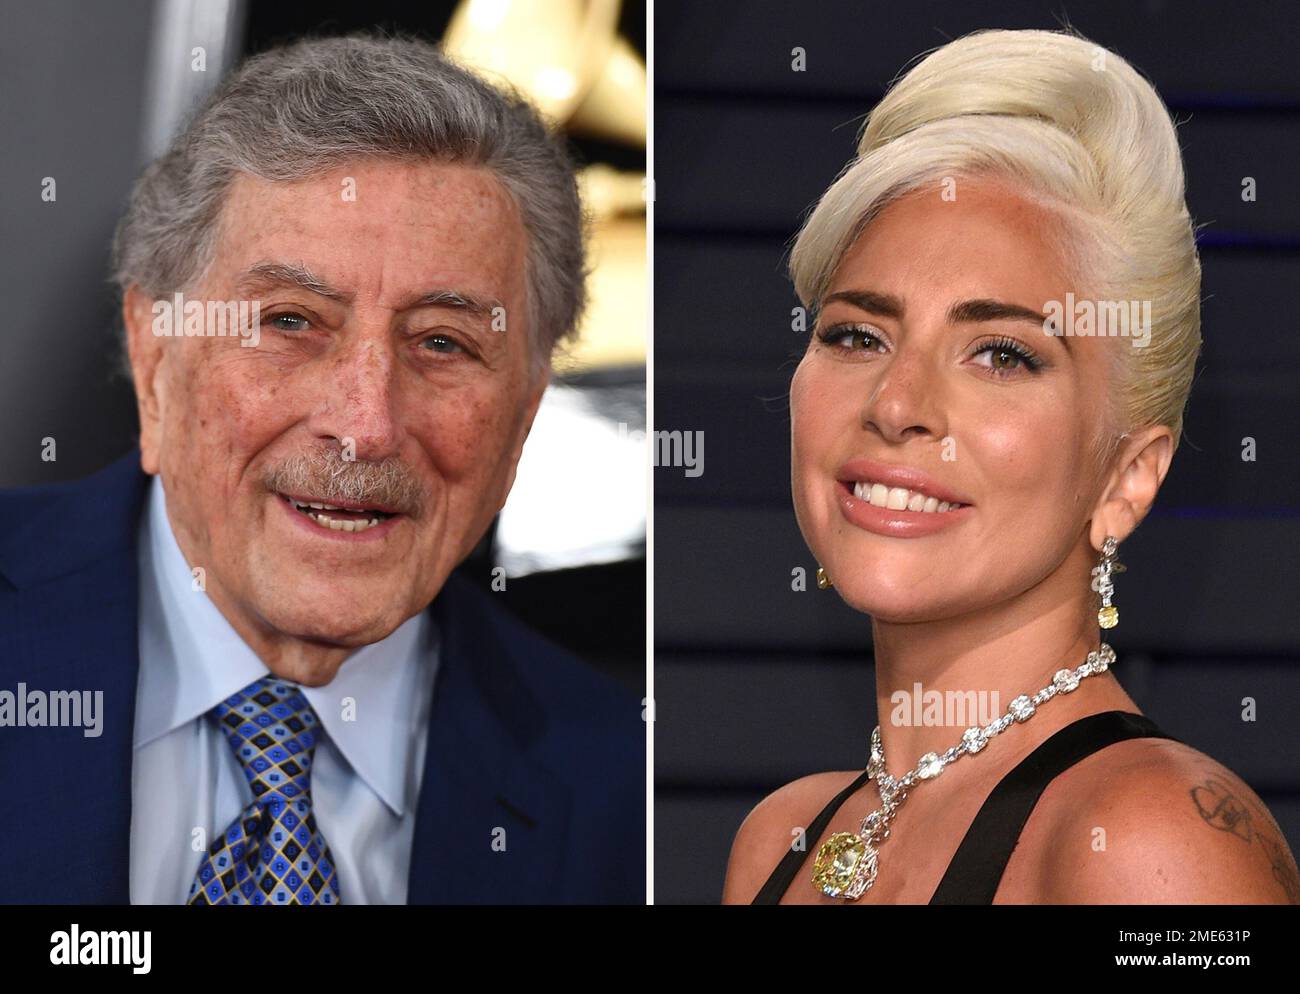 In this combination photo, Tony Bennett, left, arrives at the 61st annual  Grammy Awards on Feb. 10, 2019, in Los Angeles and Lady Gaga arrives at the  Vanity Fair Oscar Party on